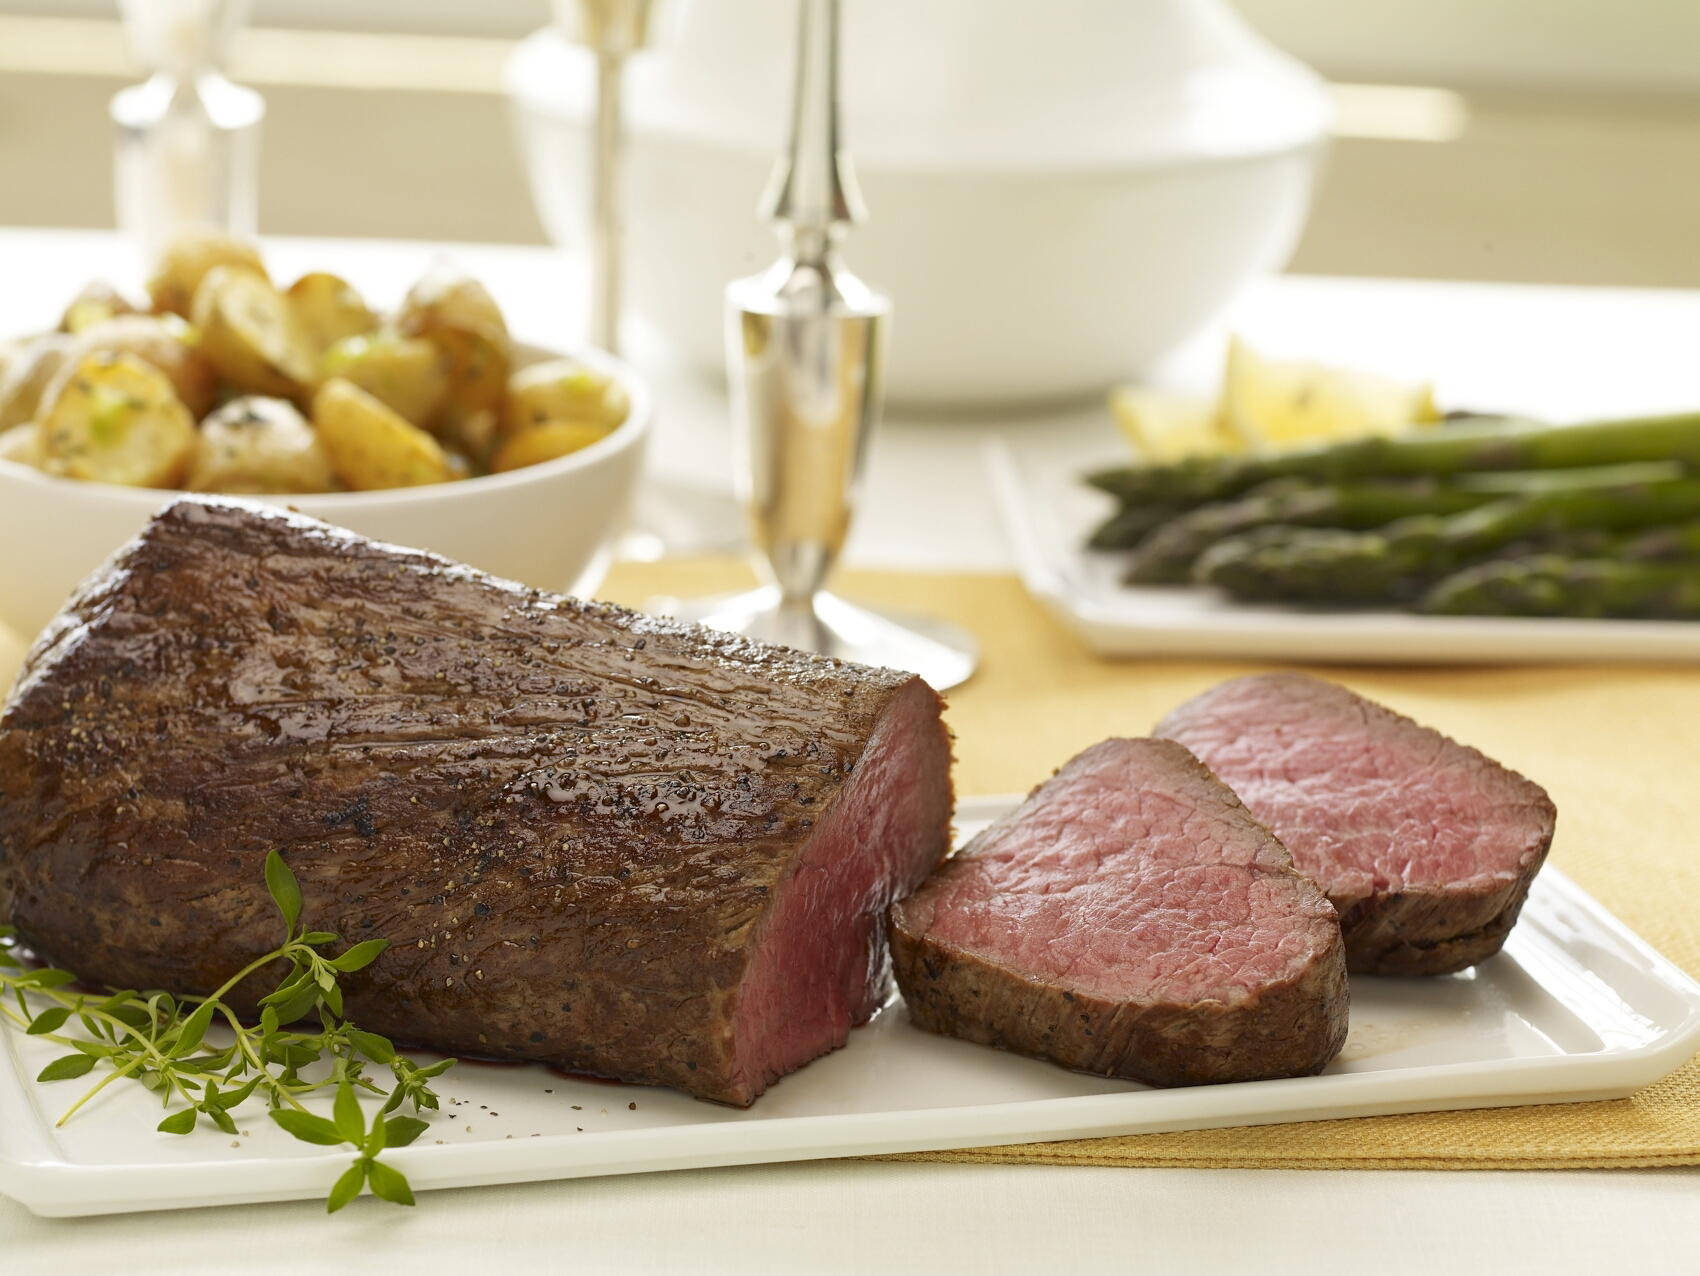 Recipe Chateaubriand Roast With Bordelaise Sauce Lobel S Of New York The Finest Dry Aged Steaks Roasts And Thanksgiving Turkeys From America S 1 Butchers